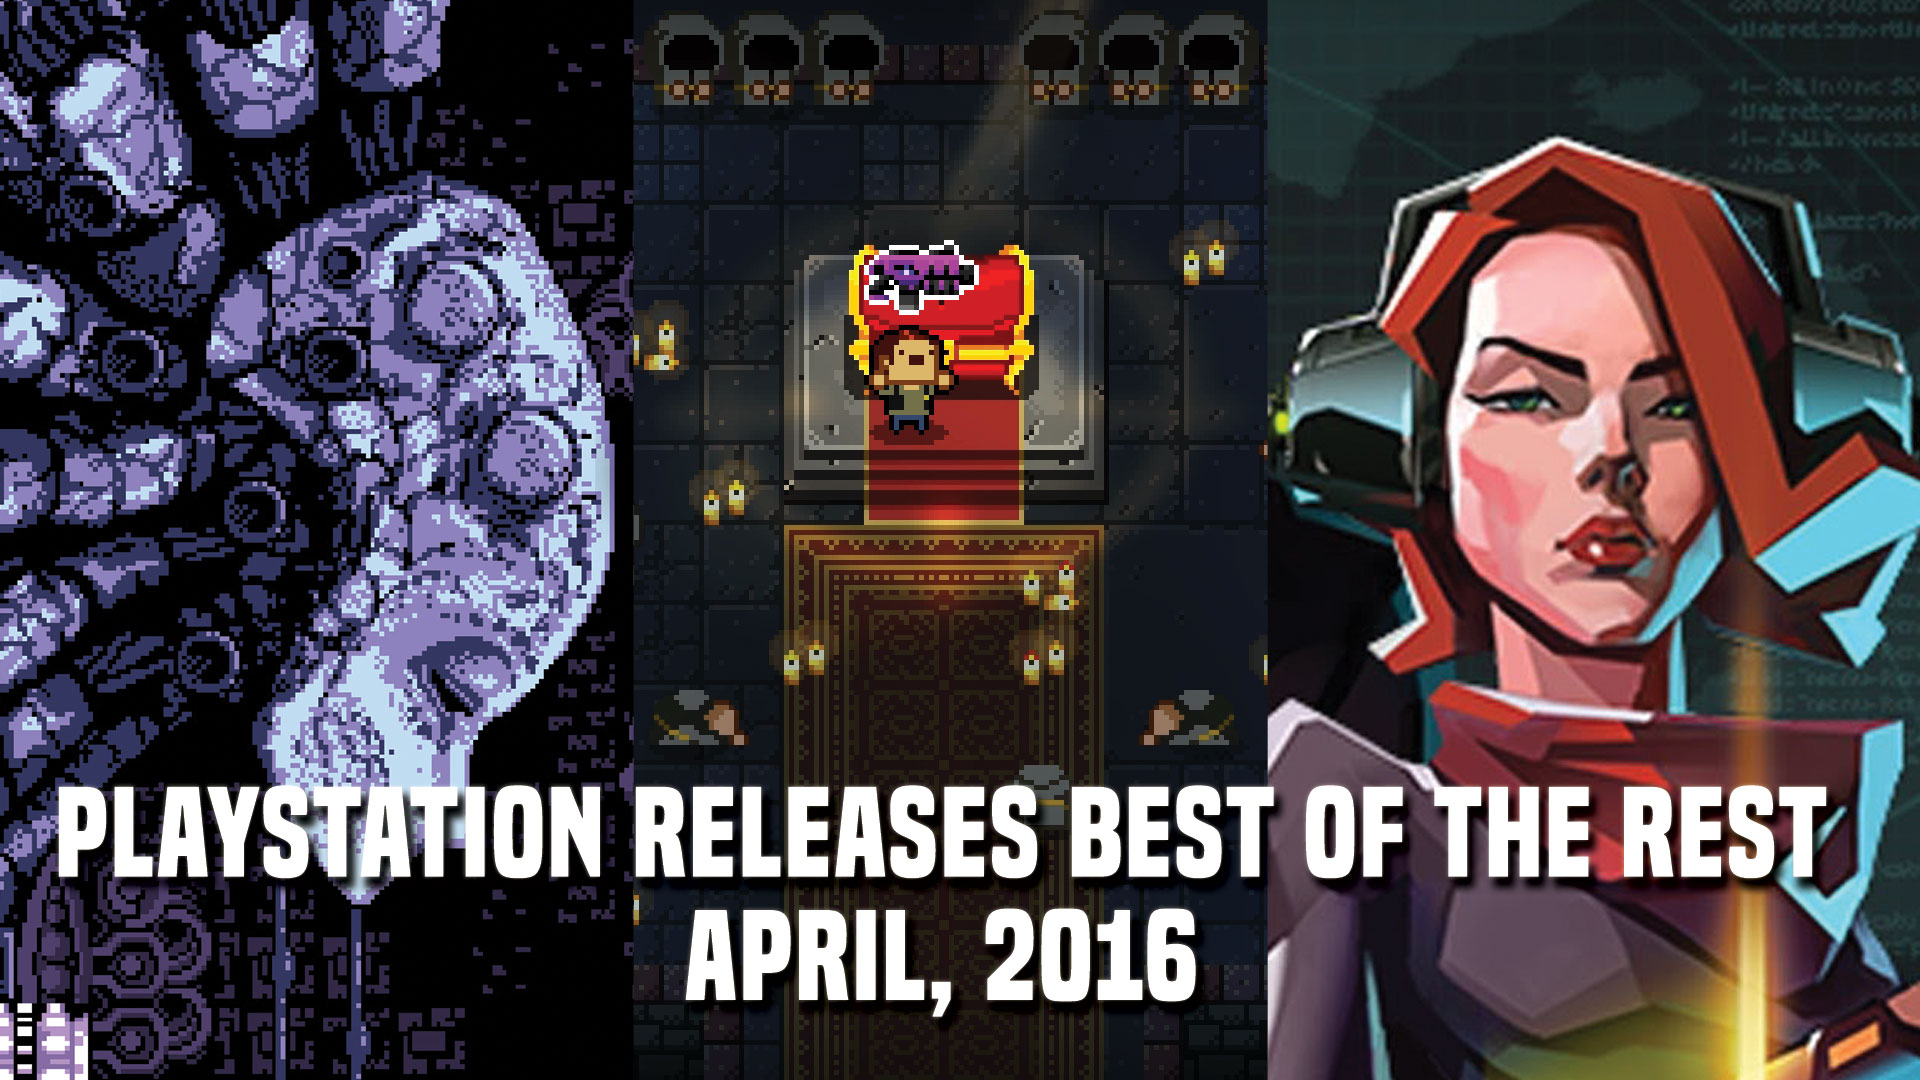 PlayStation Releases: Best of the Rest for April 2016